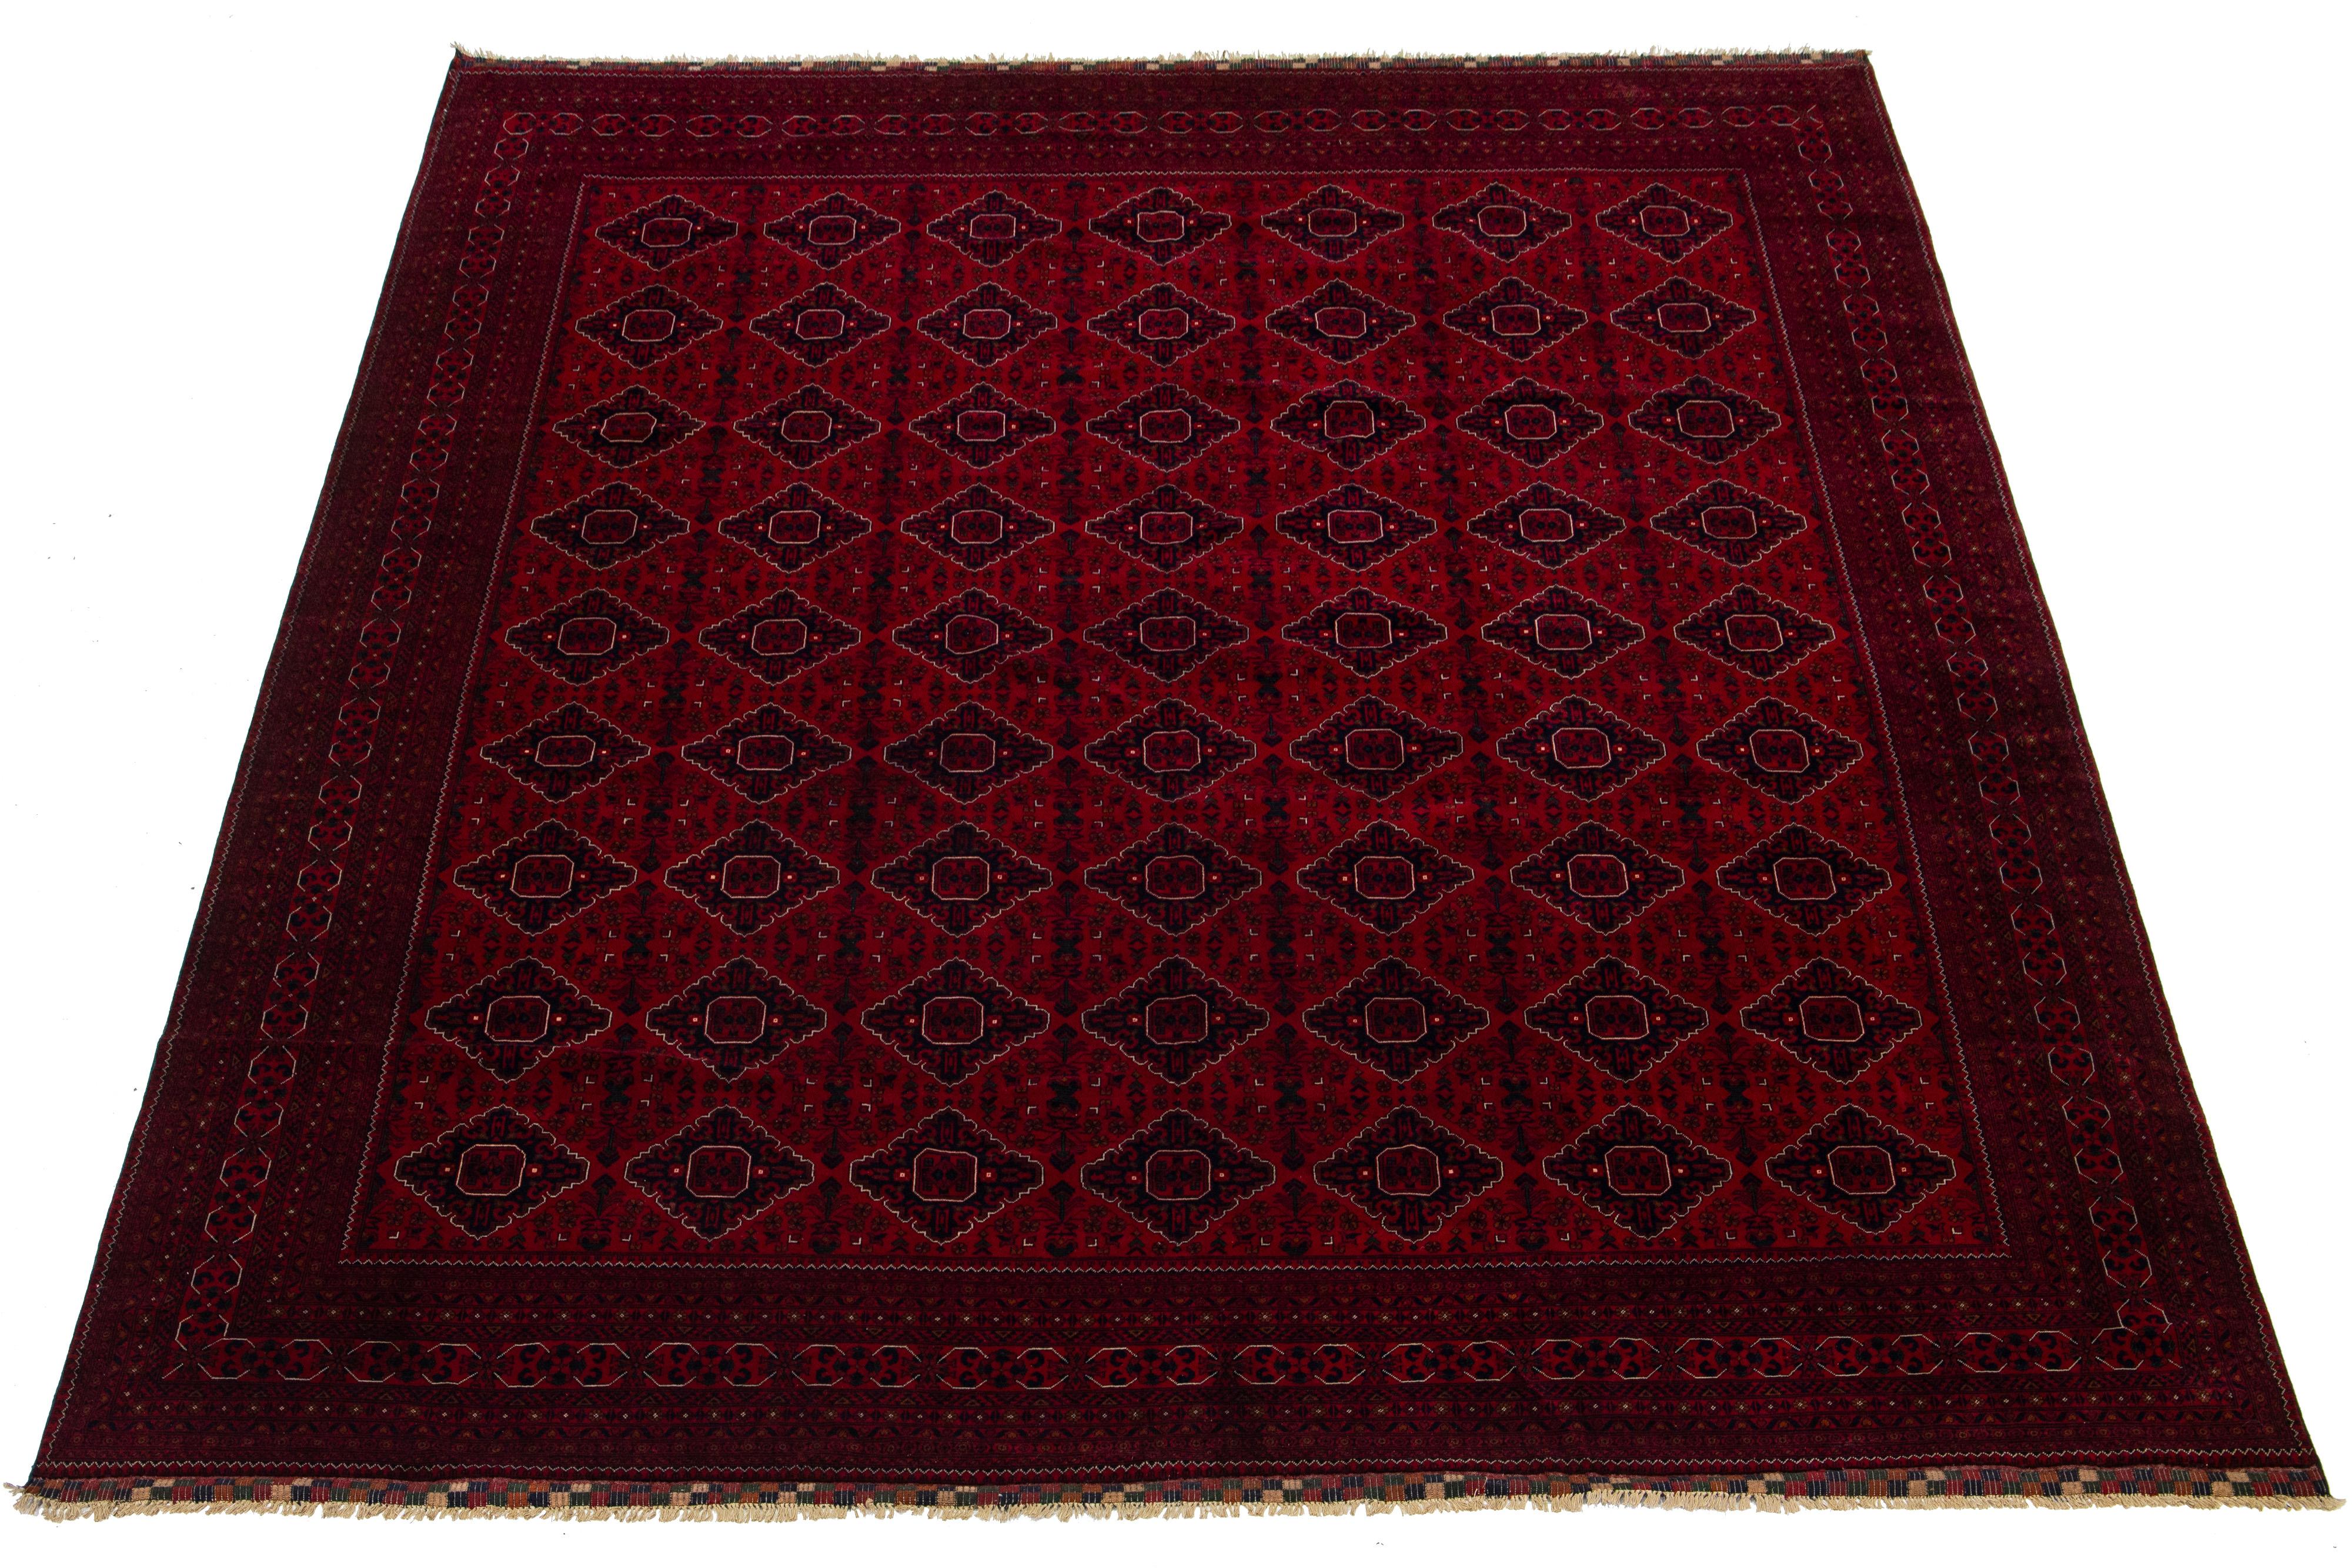 Beautiful vintage Bokhara hand-knotted wool rug with a red field. This Persian rug has navy blue accents in a gorgeous all-over geometric Pattern Design.

This rug measures 13' x 15'10